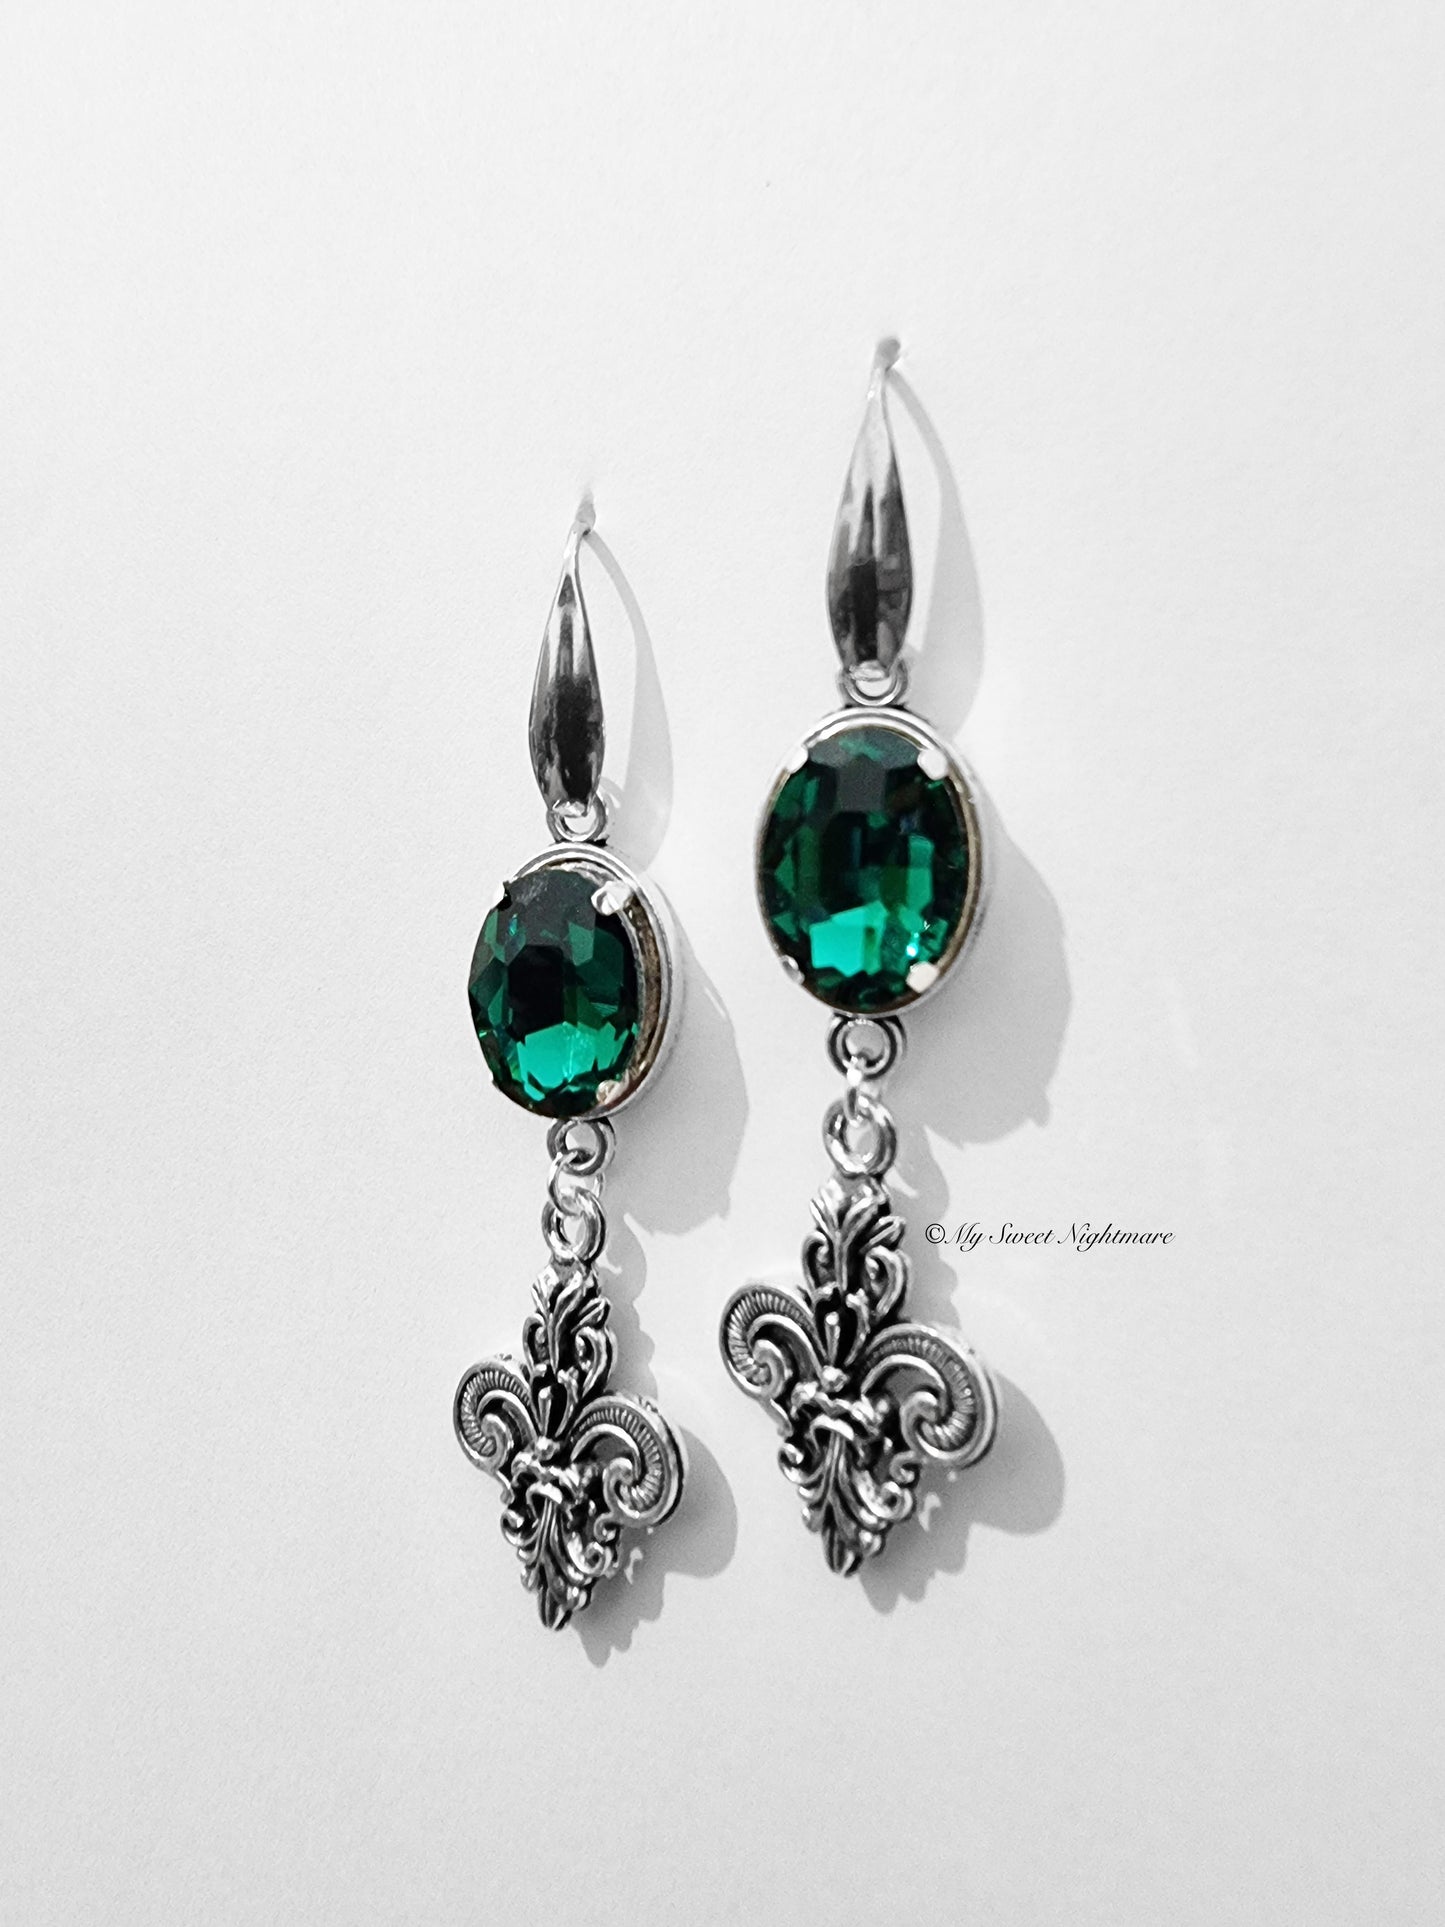 Earrings with lilies and green gems